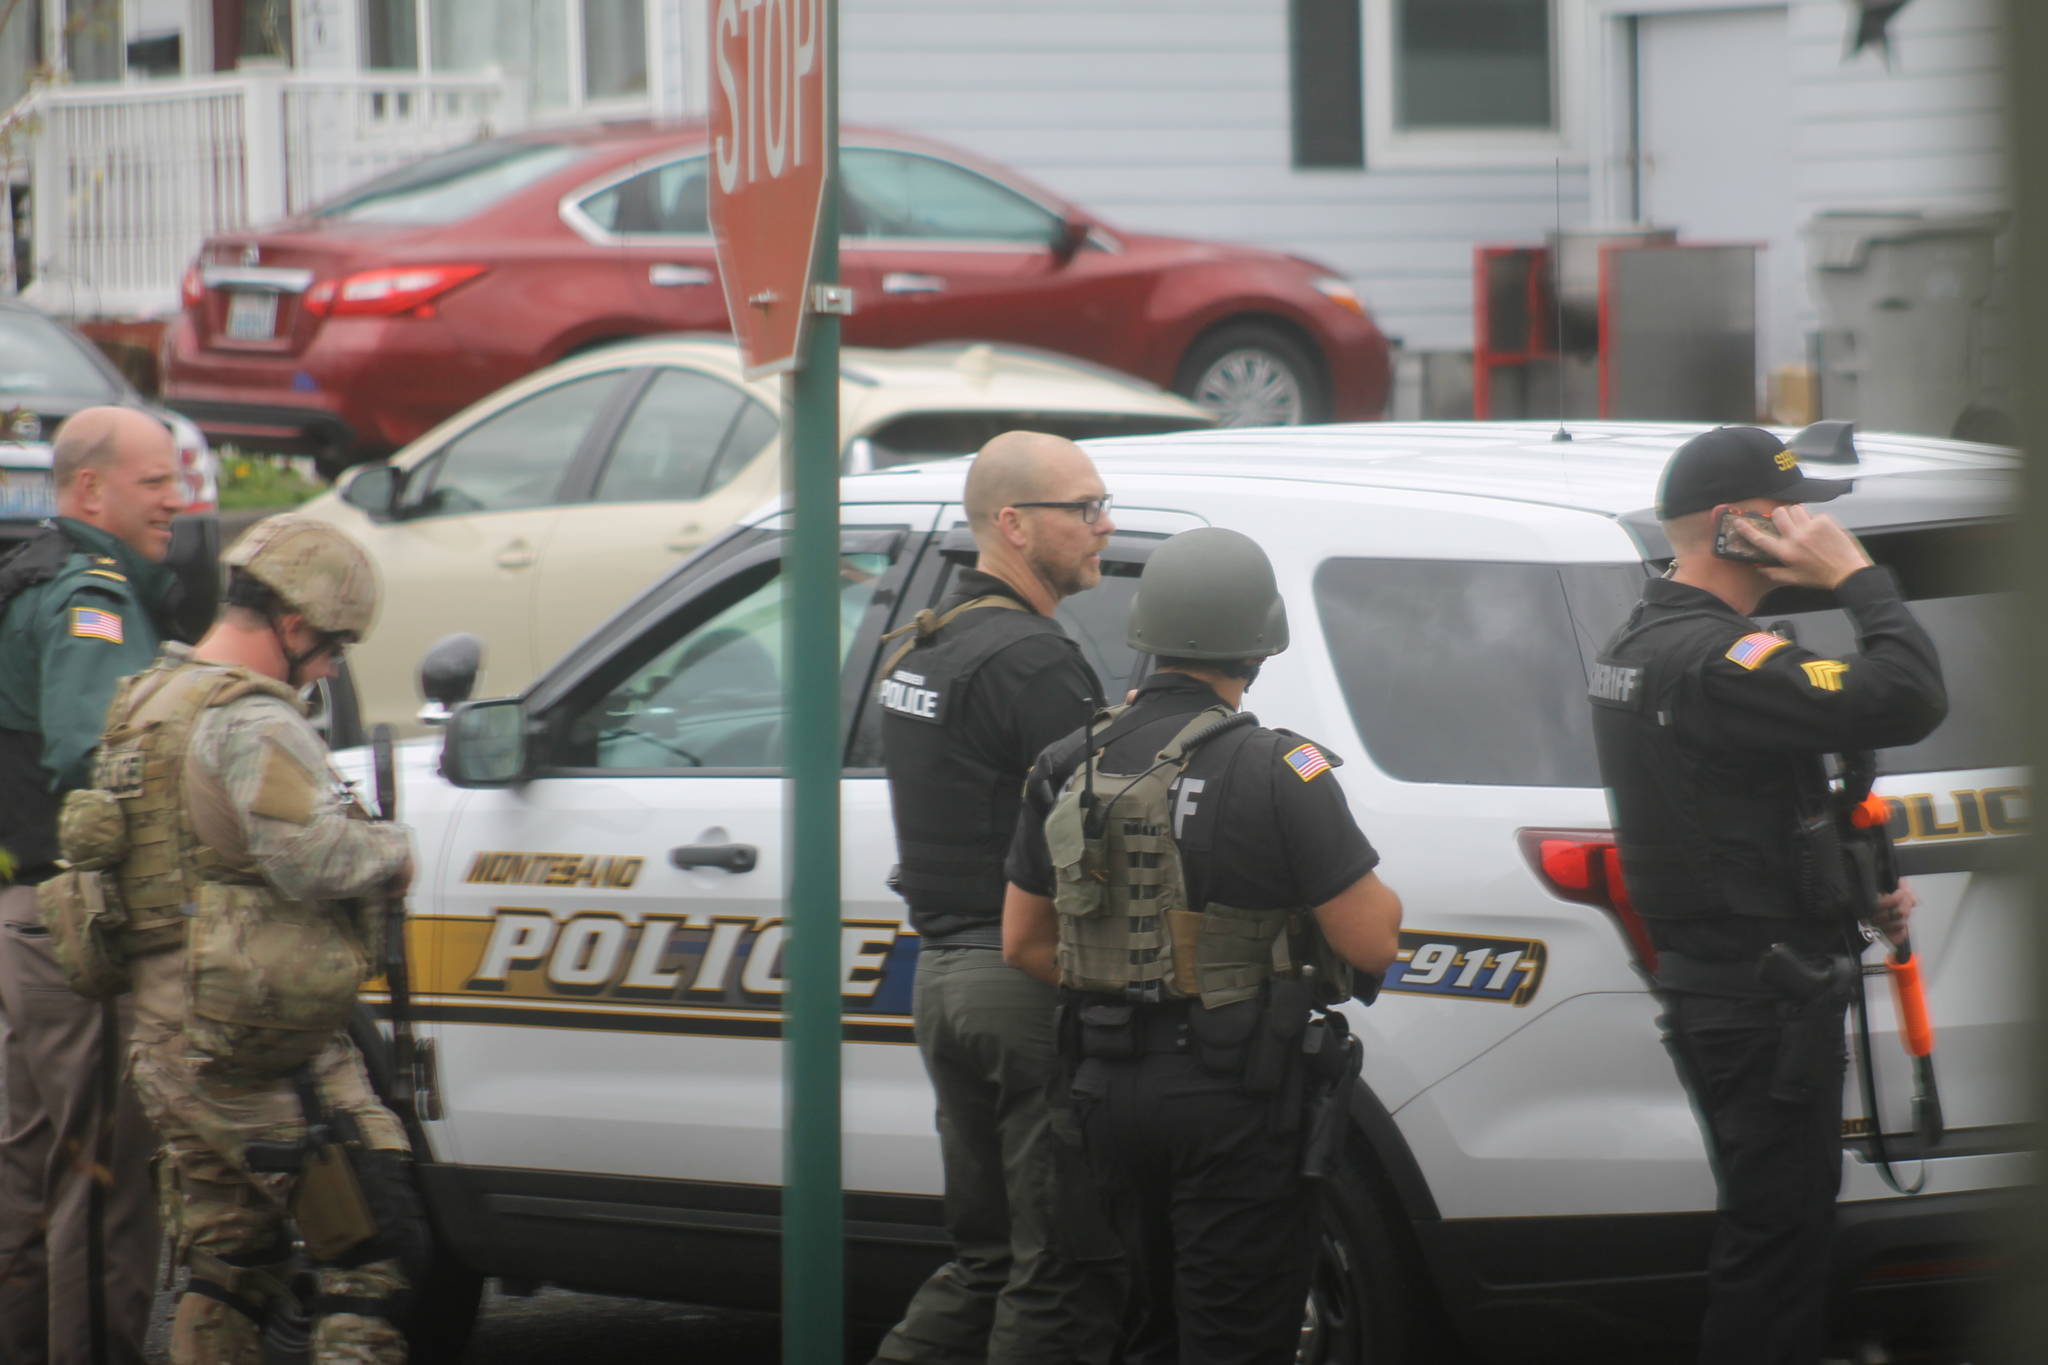 Officers from several different departments respond to a standoff situation Tuesday at a home on Academy Street in Montesano. One man, who officers say charged at them with swords, was shot and taken to Grays Harbor Community Hospital where he died Wednesday morning. (Josh Jessen photo)